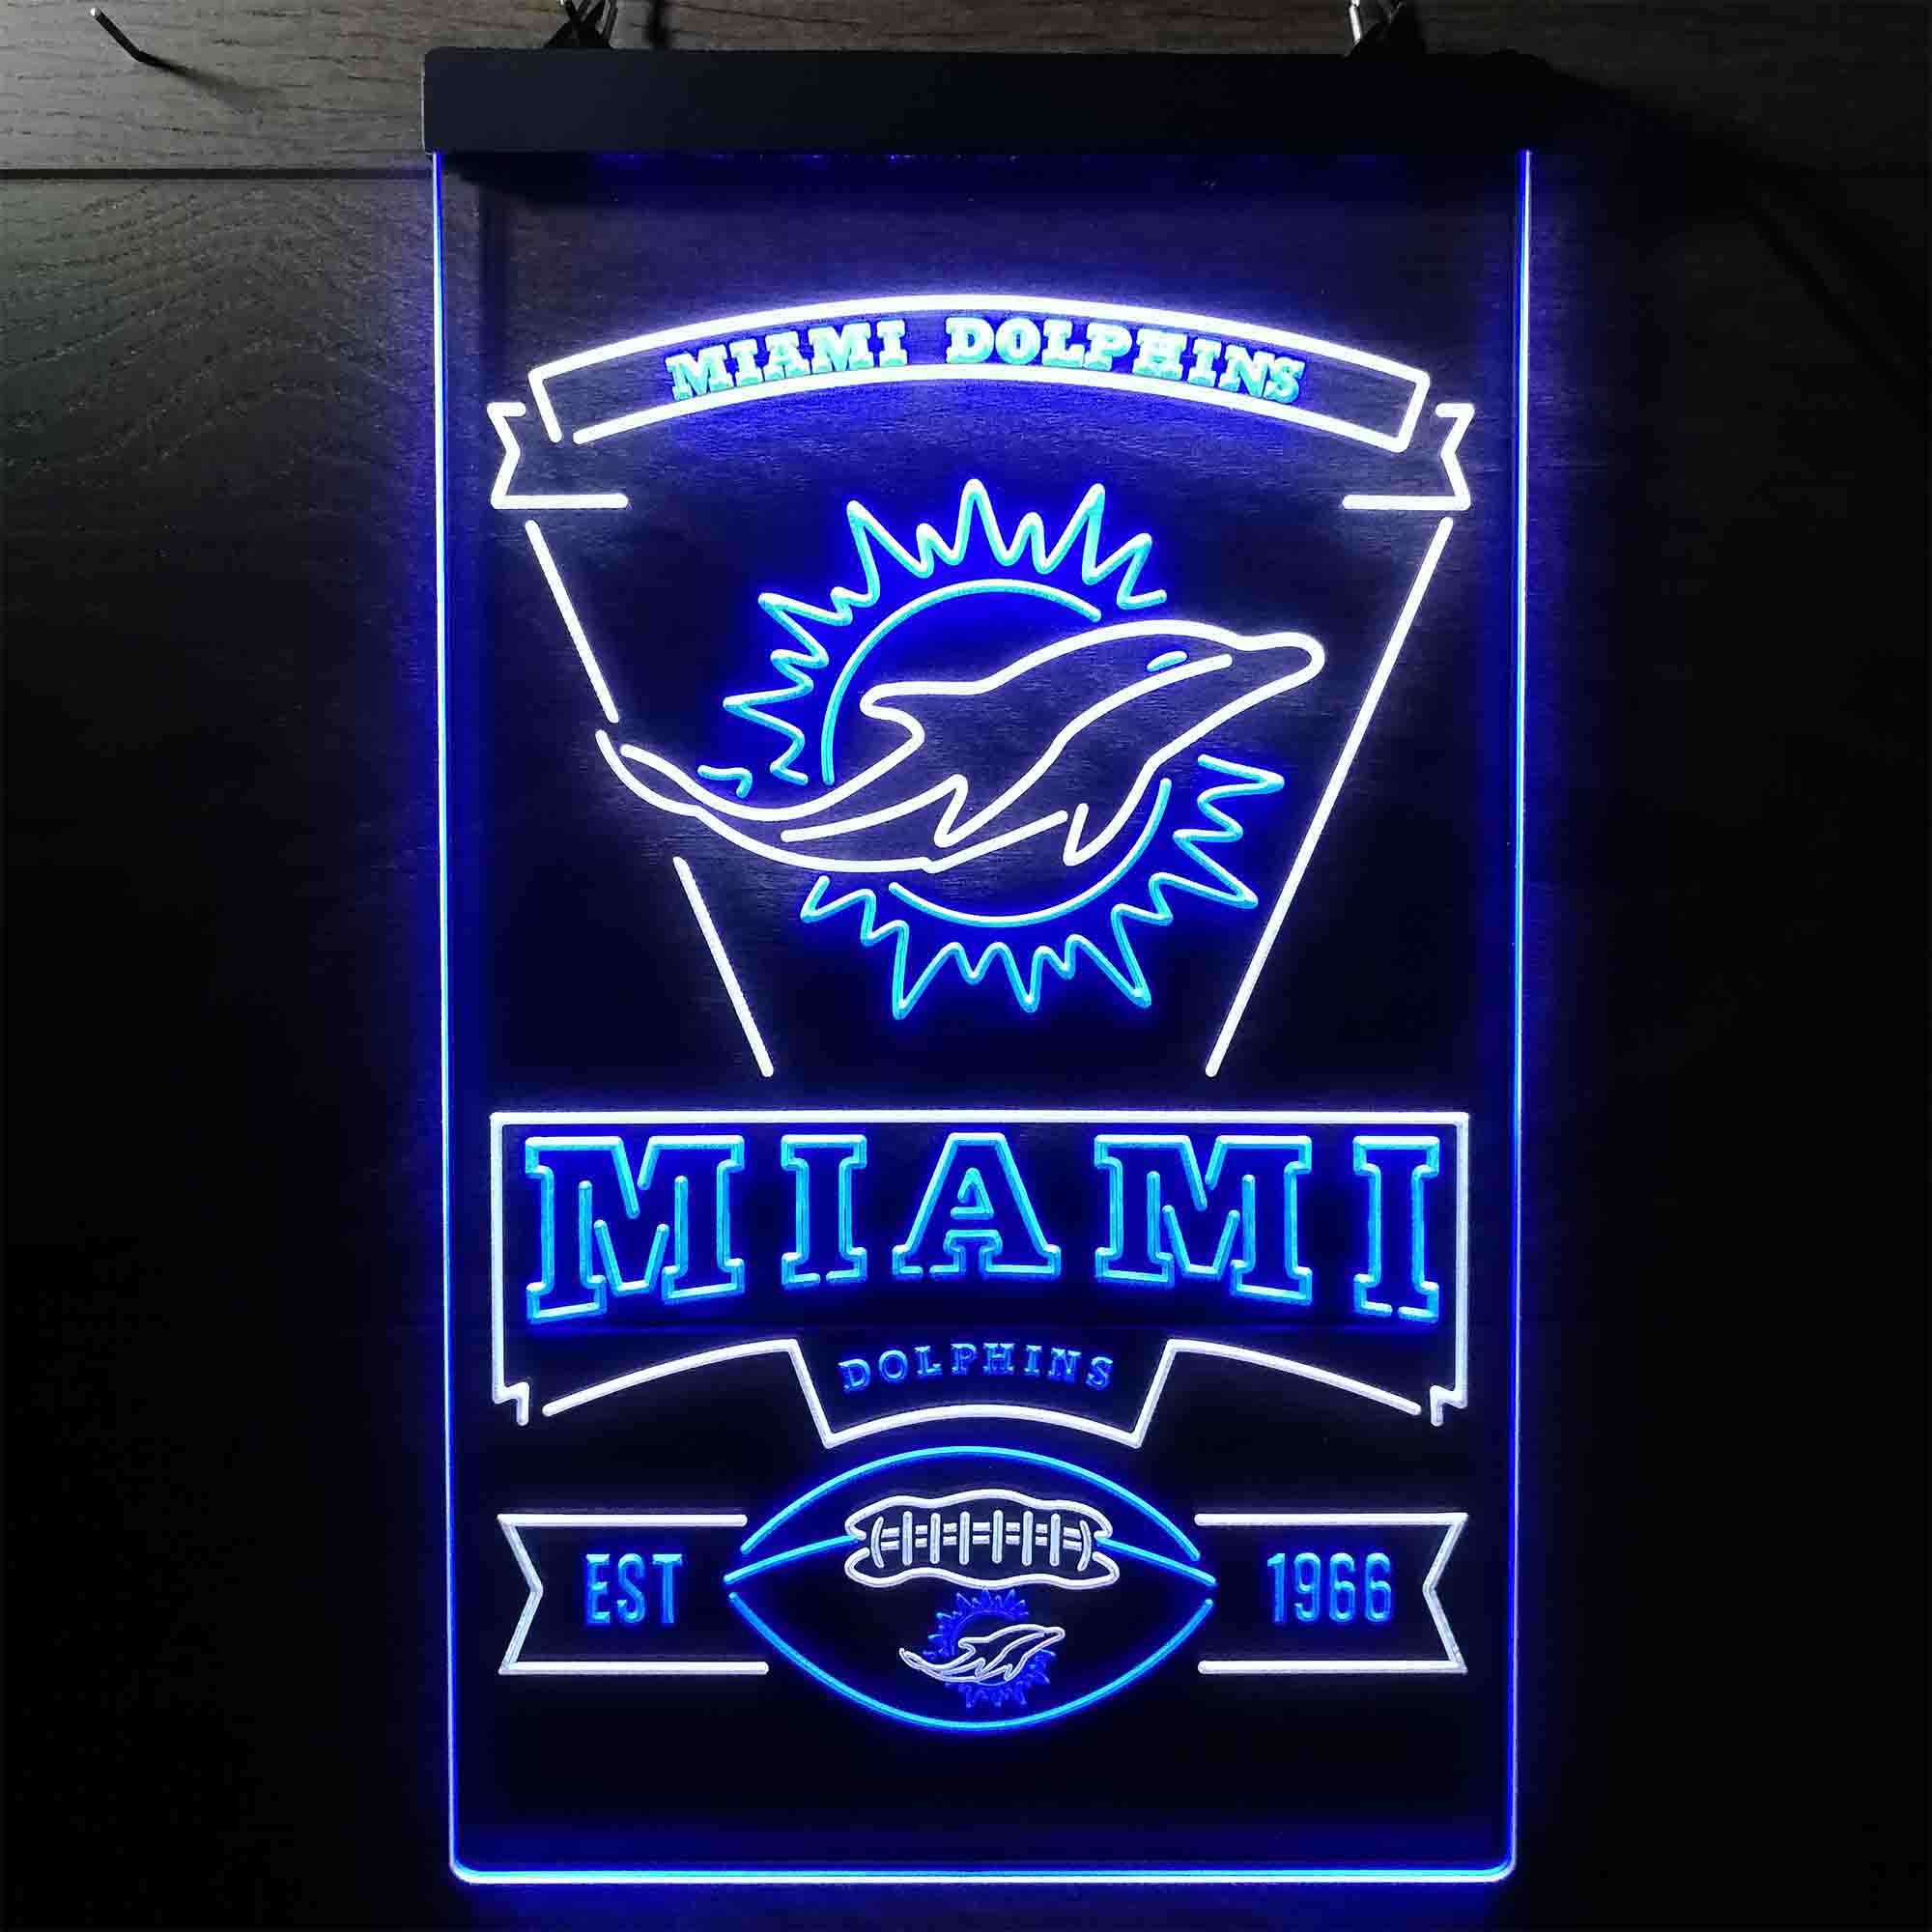 Miami Dolphins Est. 1966 Neon-Like LED Sign